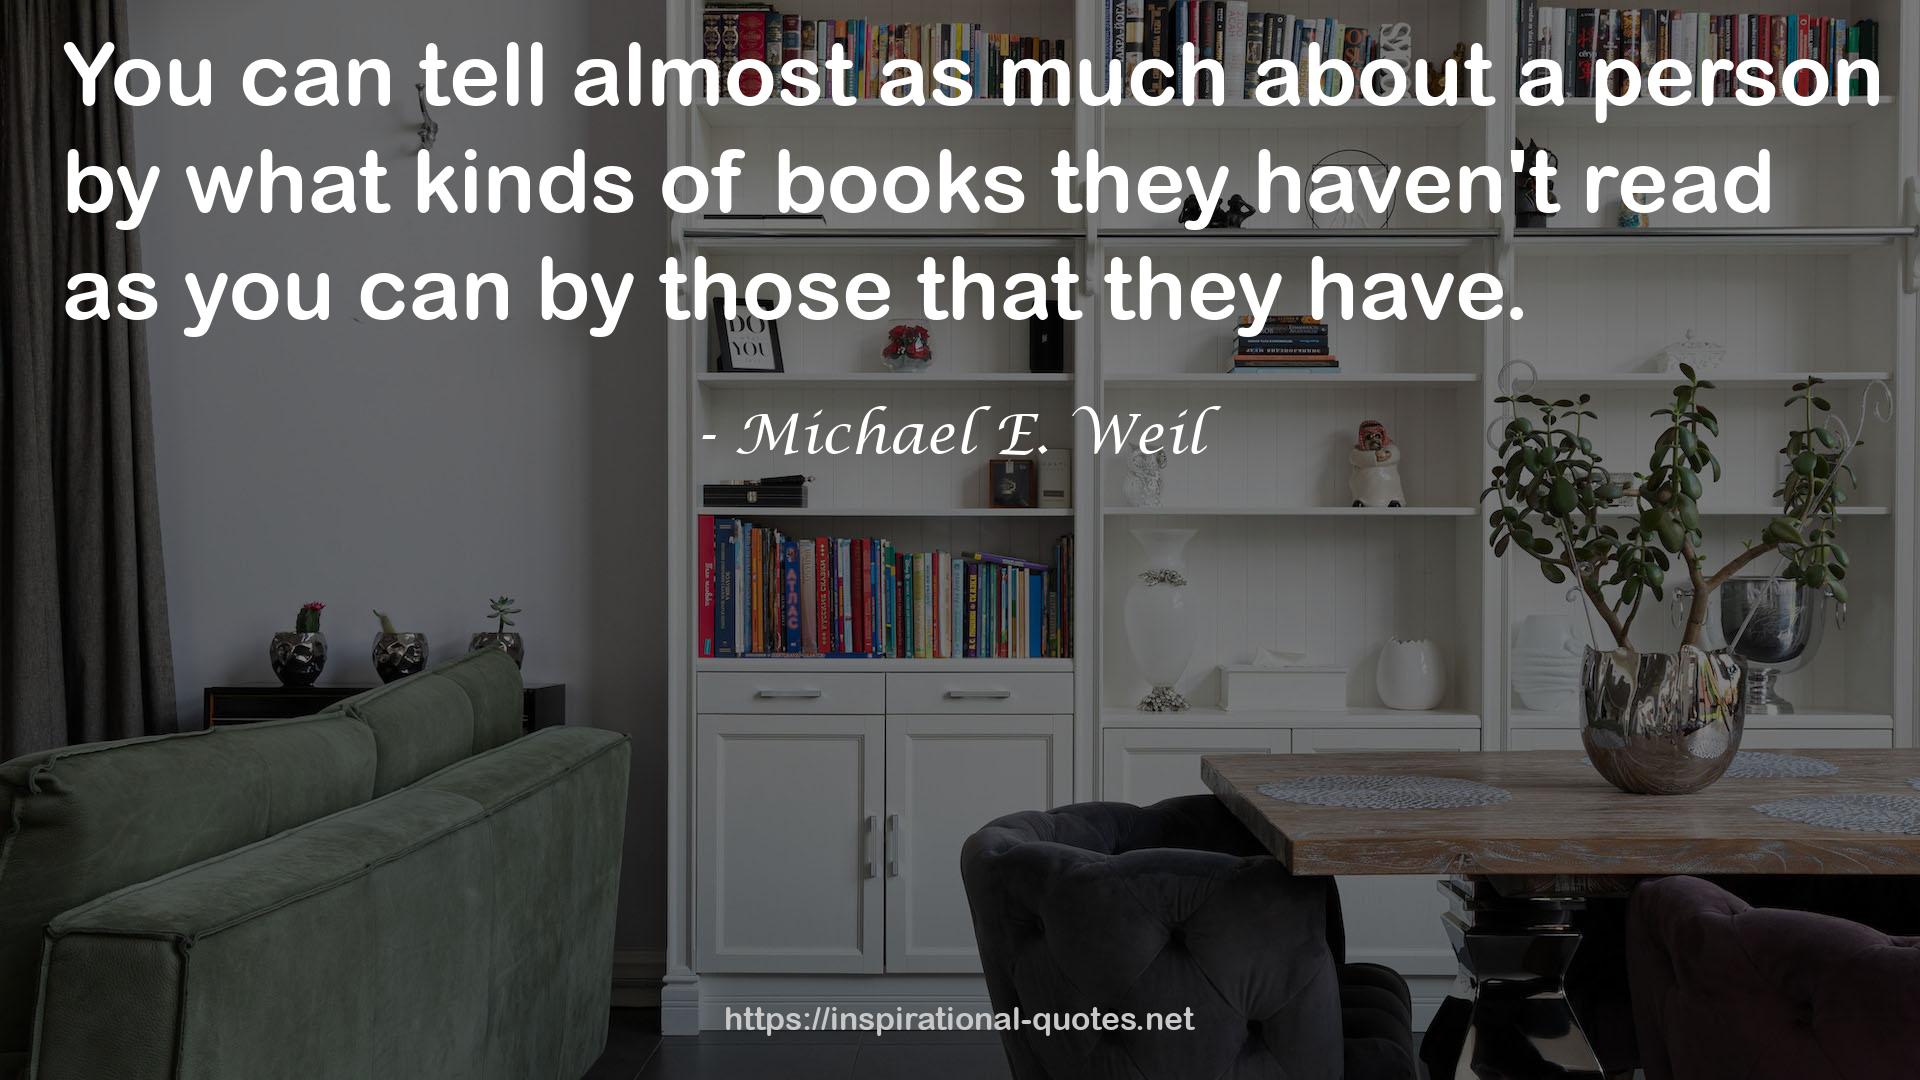 Michael E. Weil QUOTES